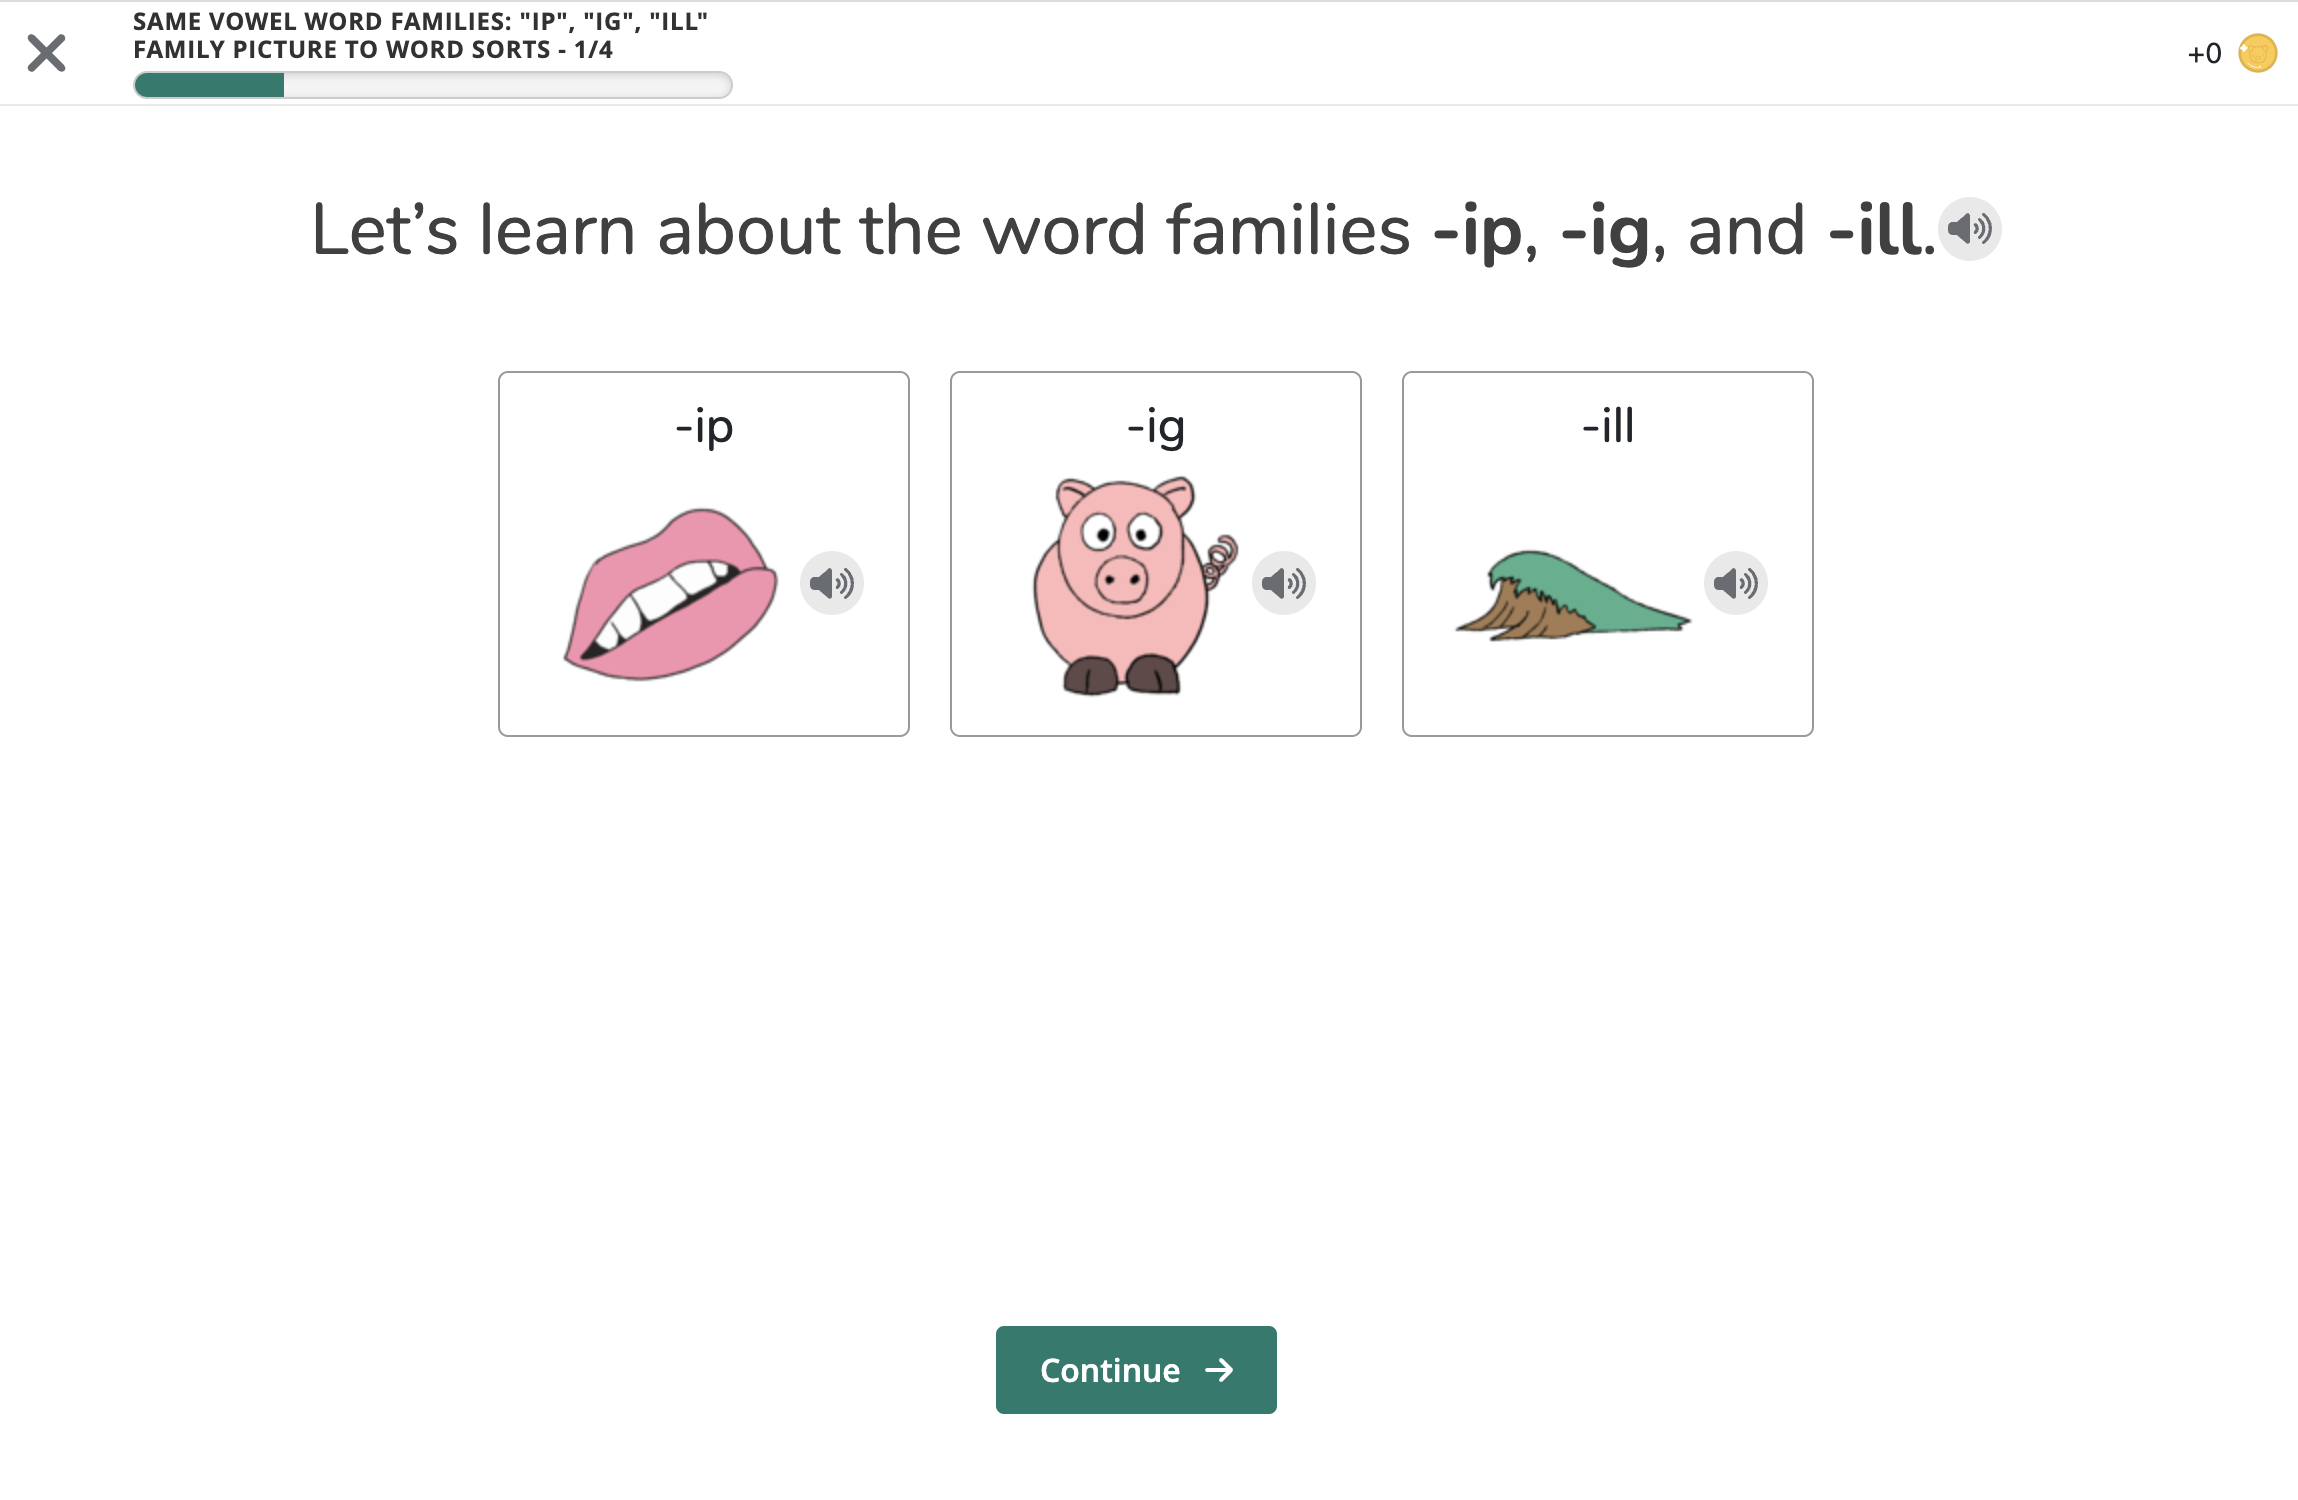 An example concept introduction activity, where the student will learn about word endings.